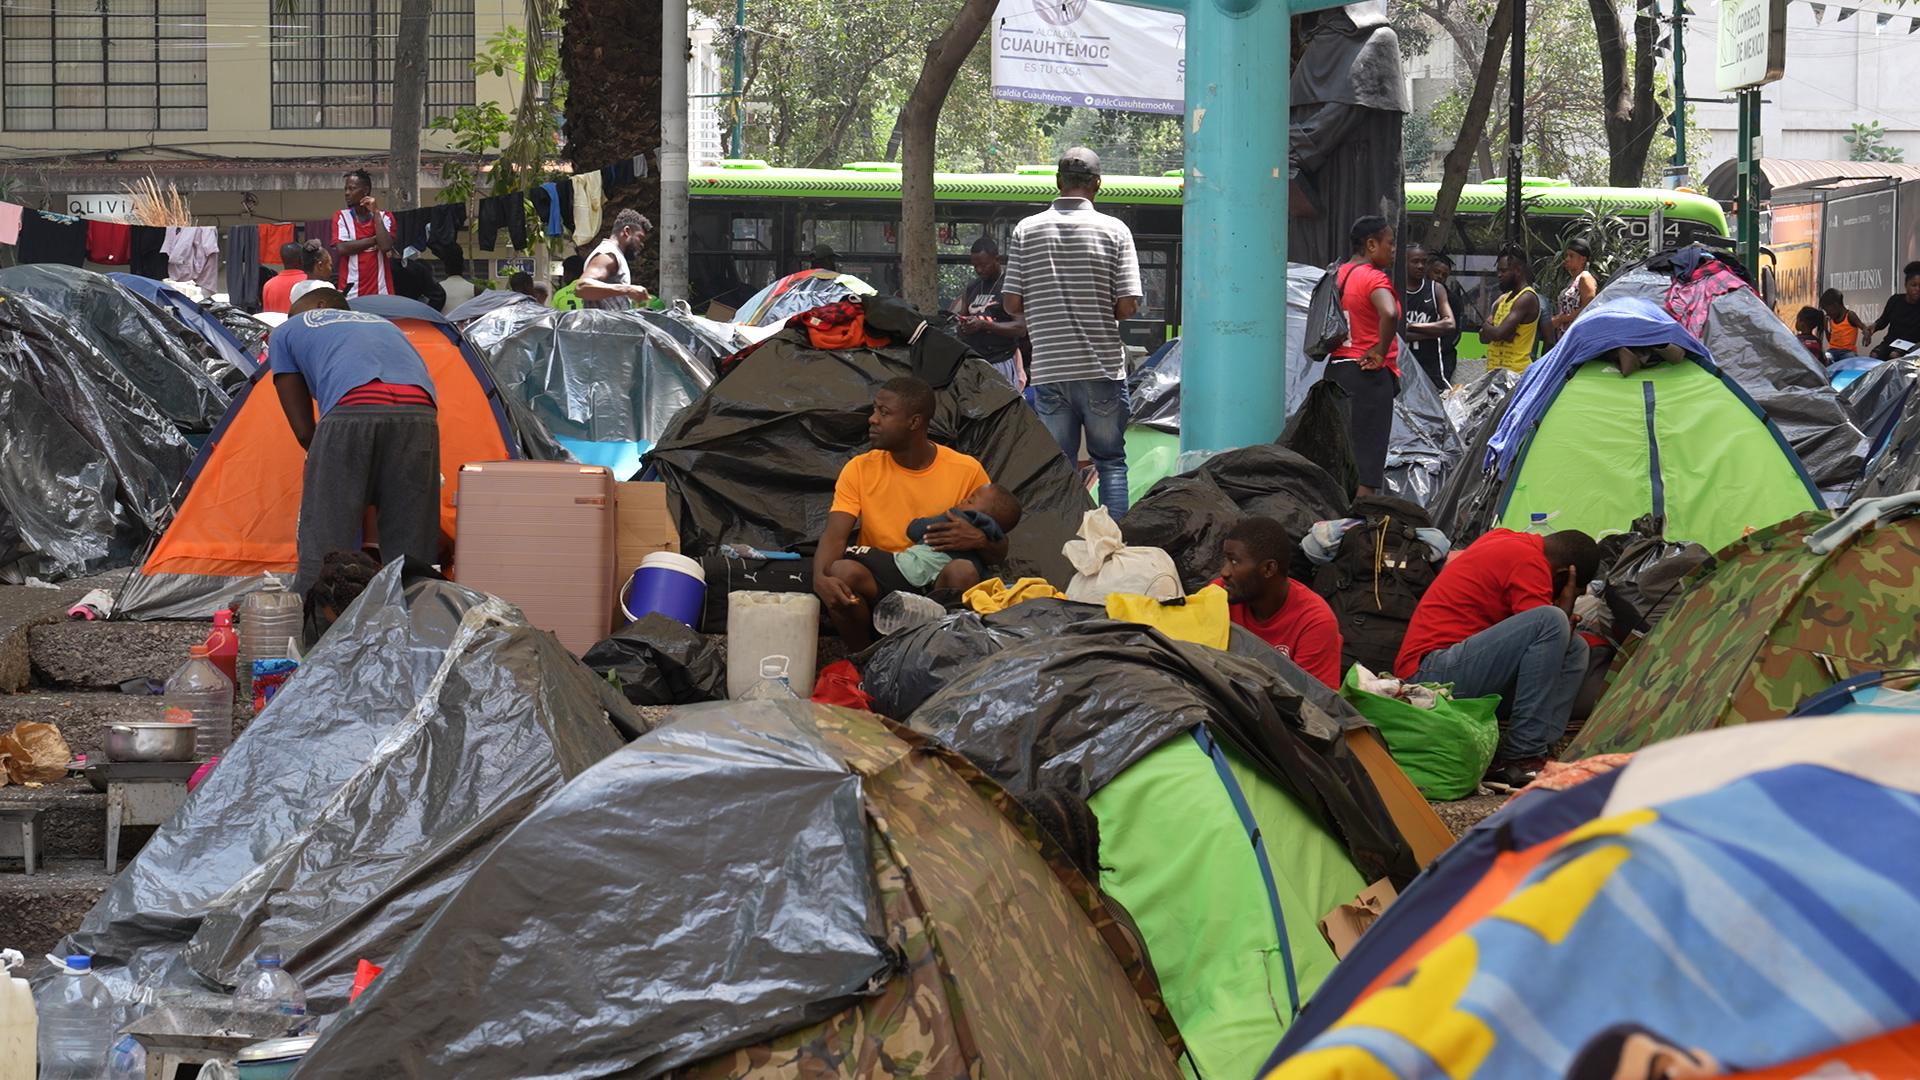 Hundreds of Haitians set up a camp at a park in Mexico City's trendy Roma neighborhood.